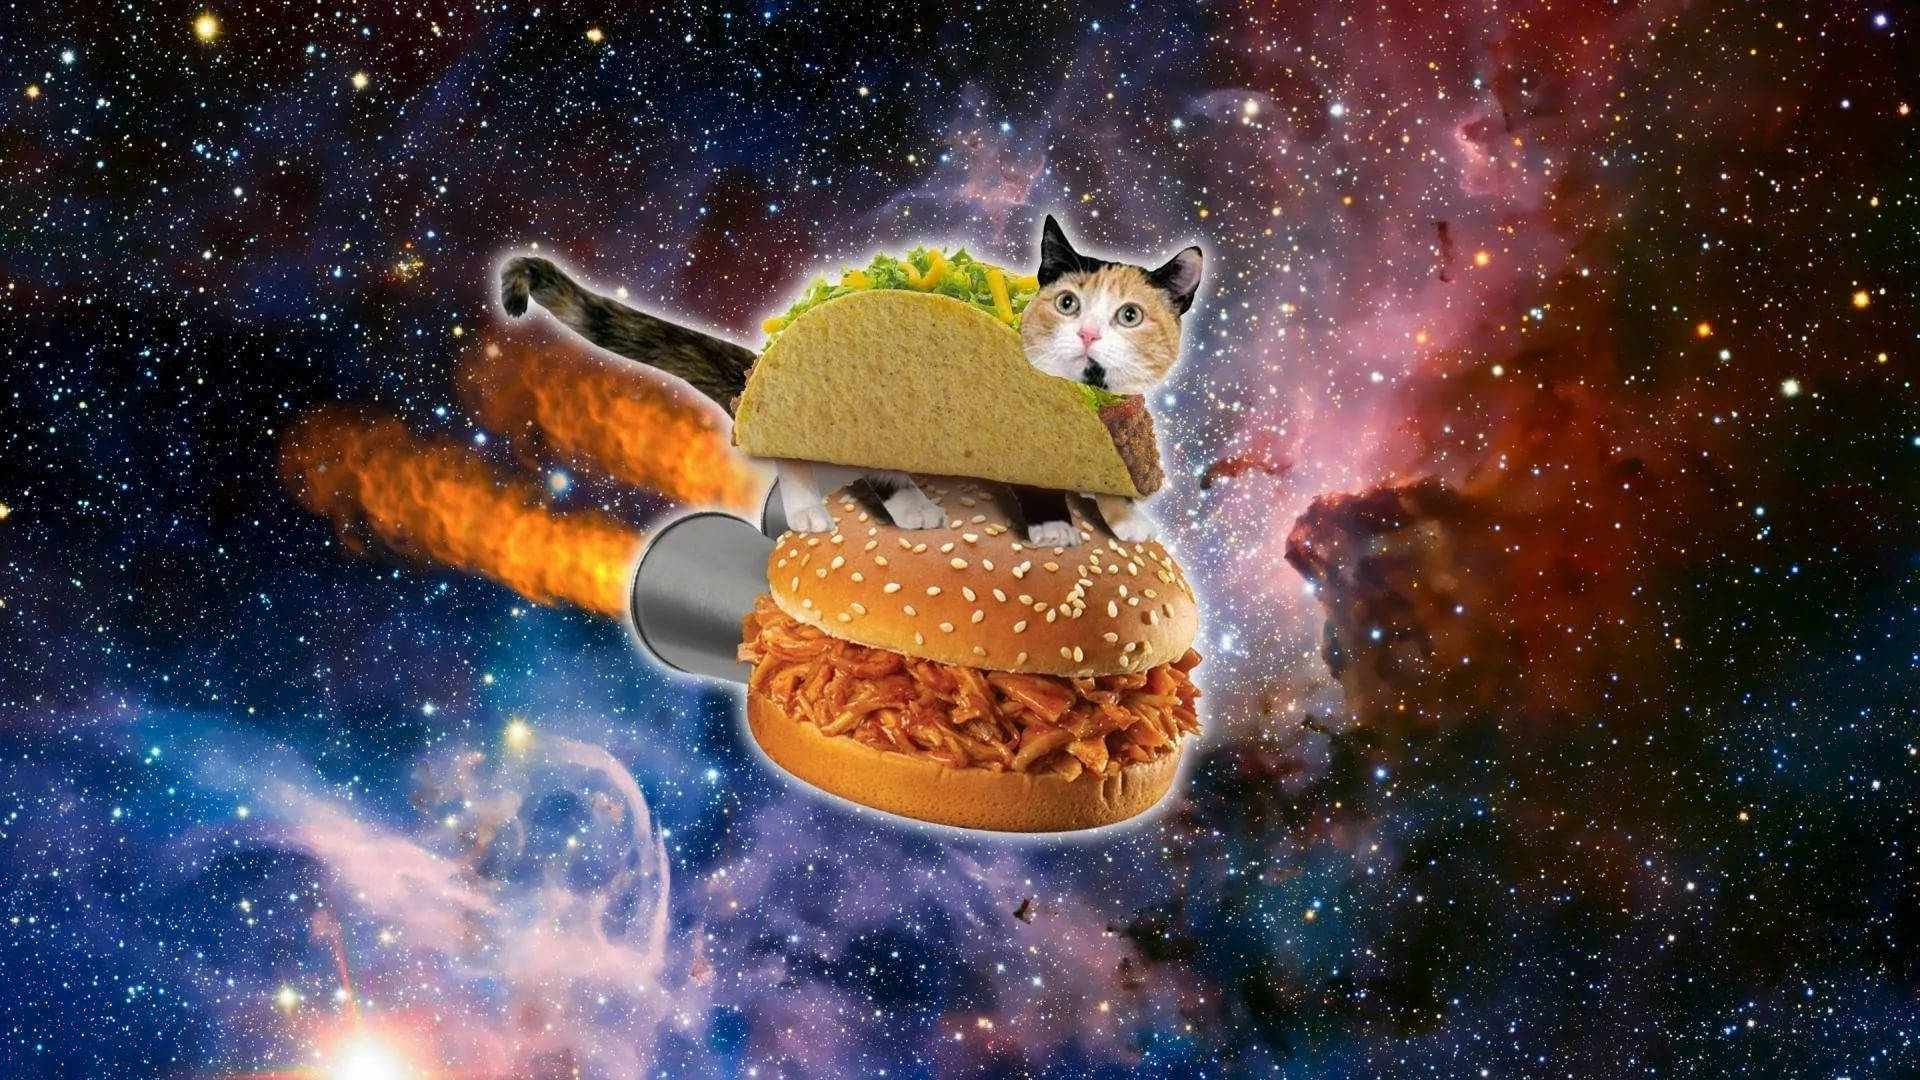 Taco Cat is having the ride of his life! Wallpaper